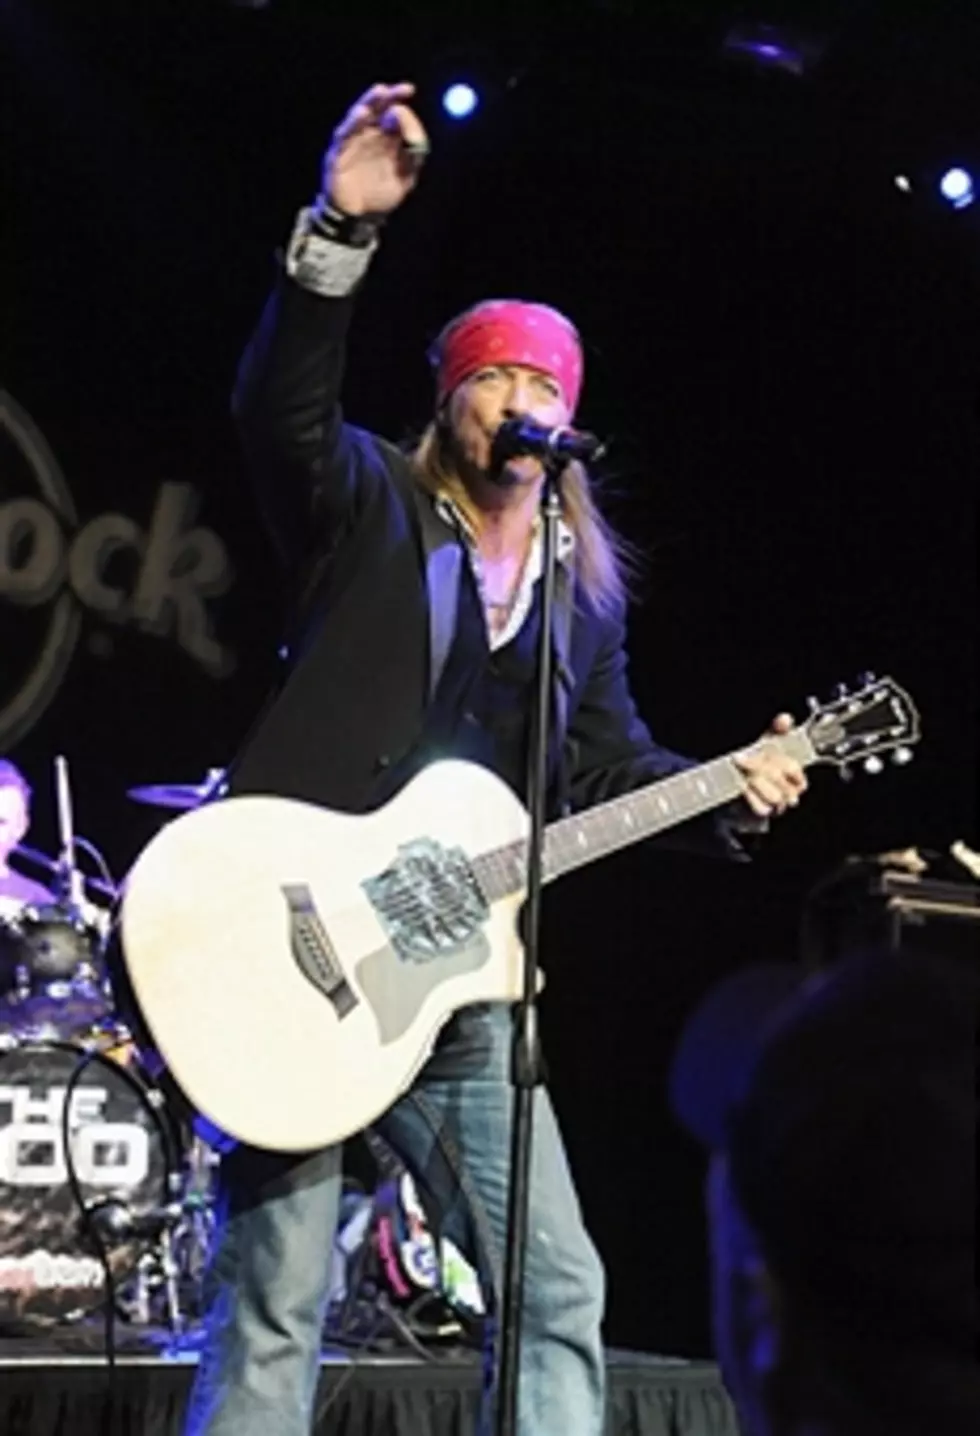 Update on Bret Michaels &#8211; Not Performing in Albany Tonight